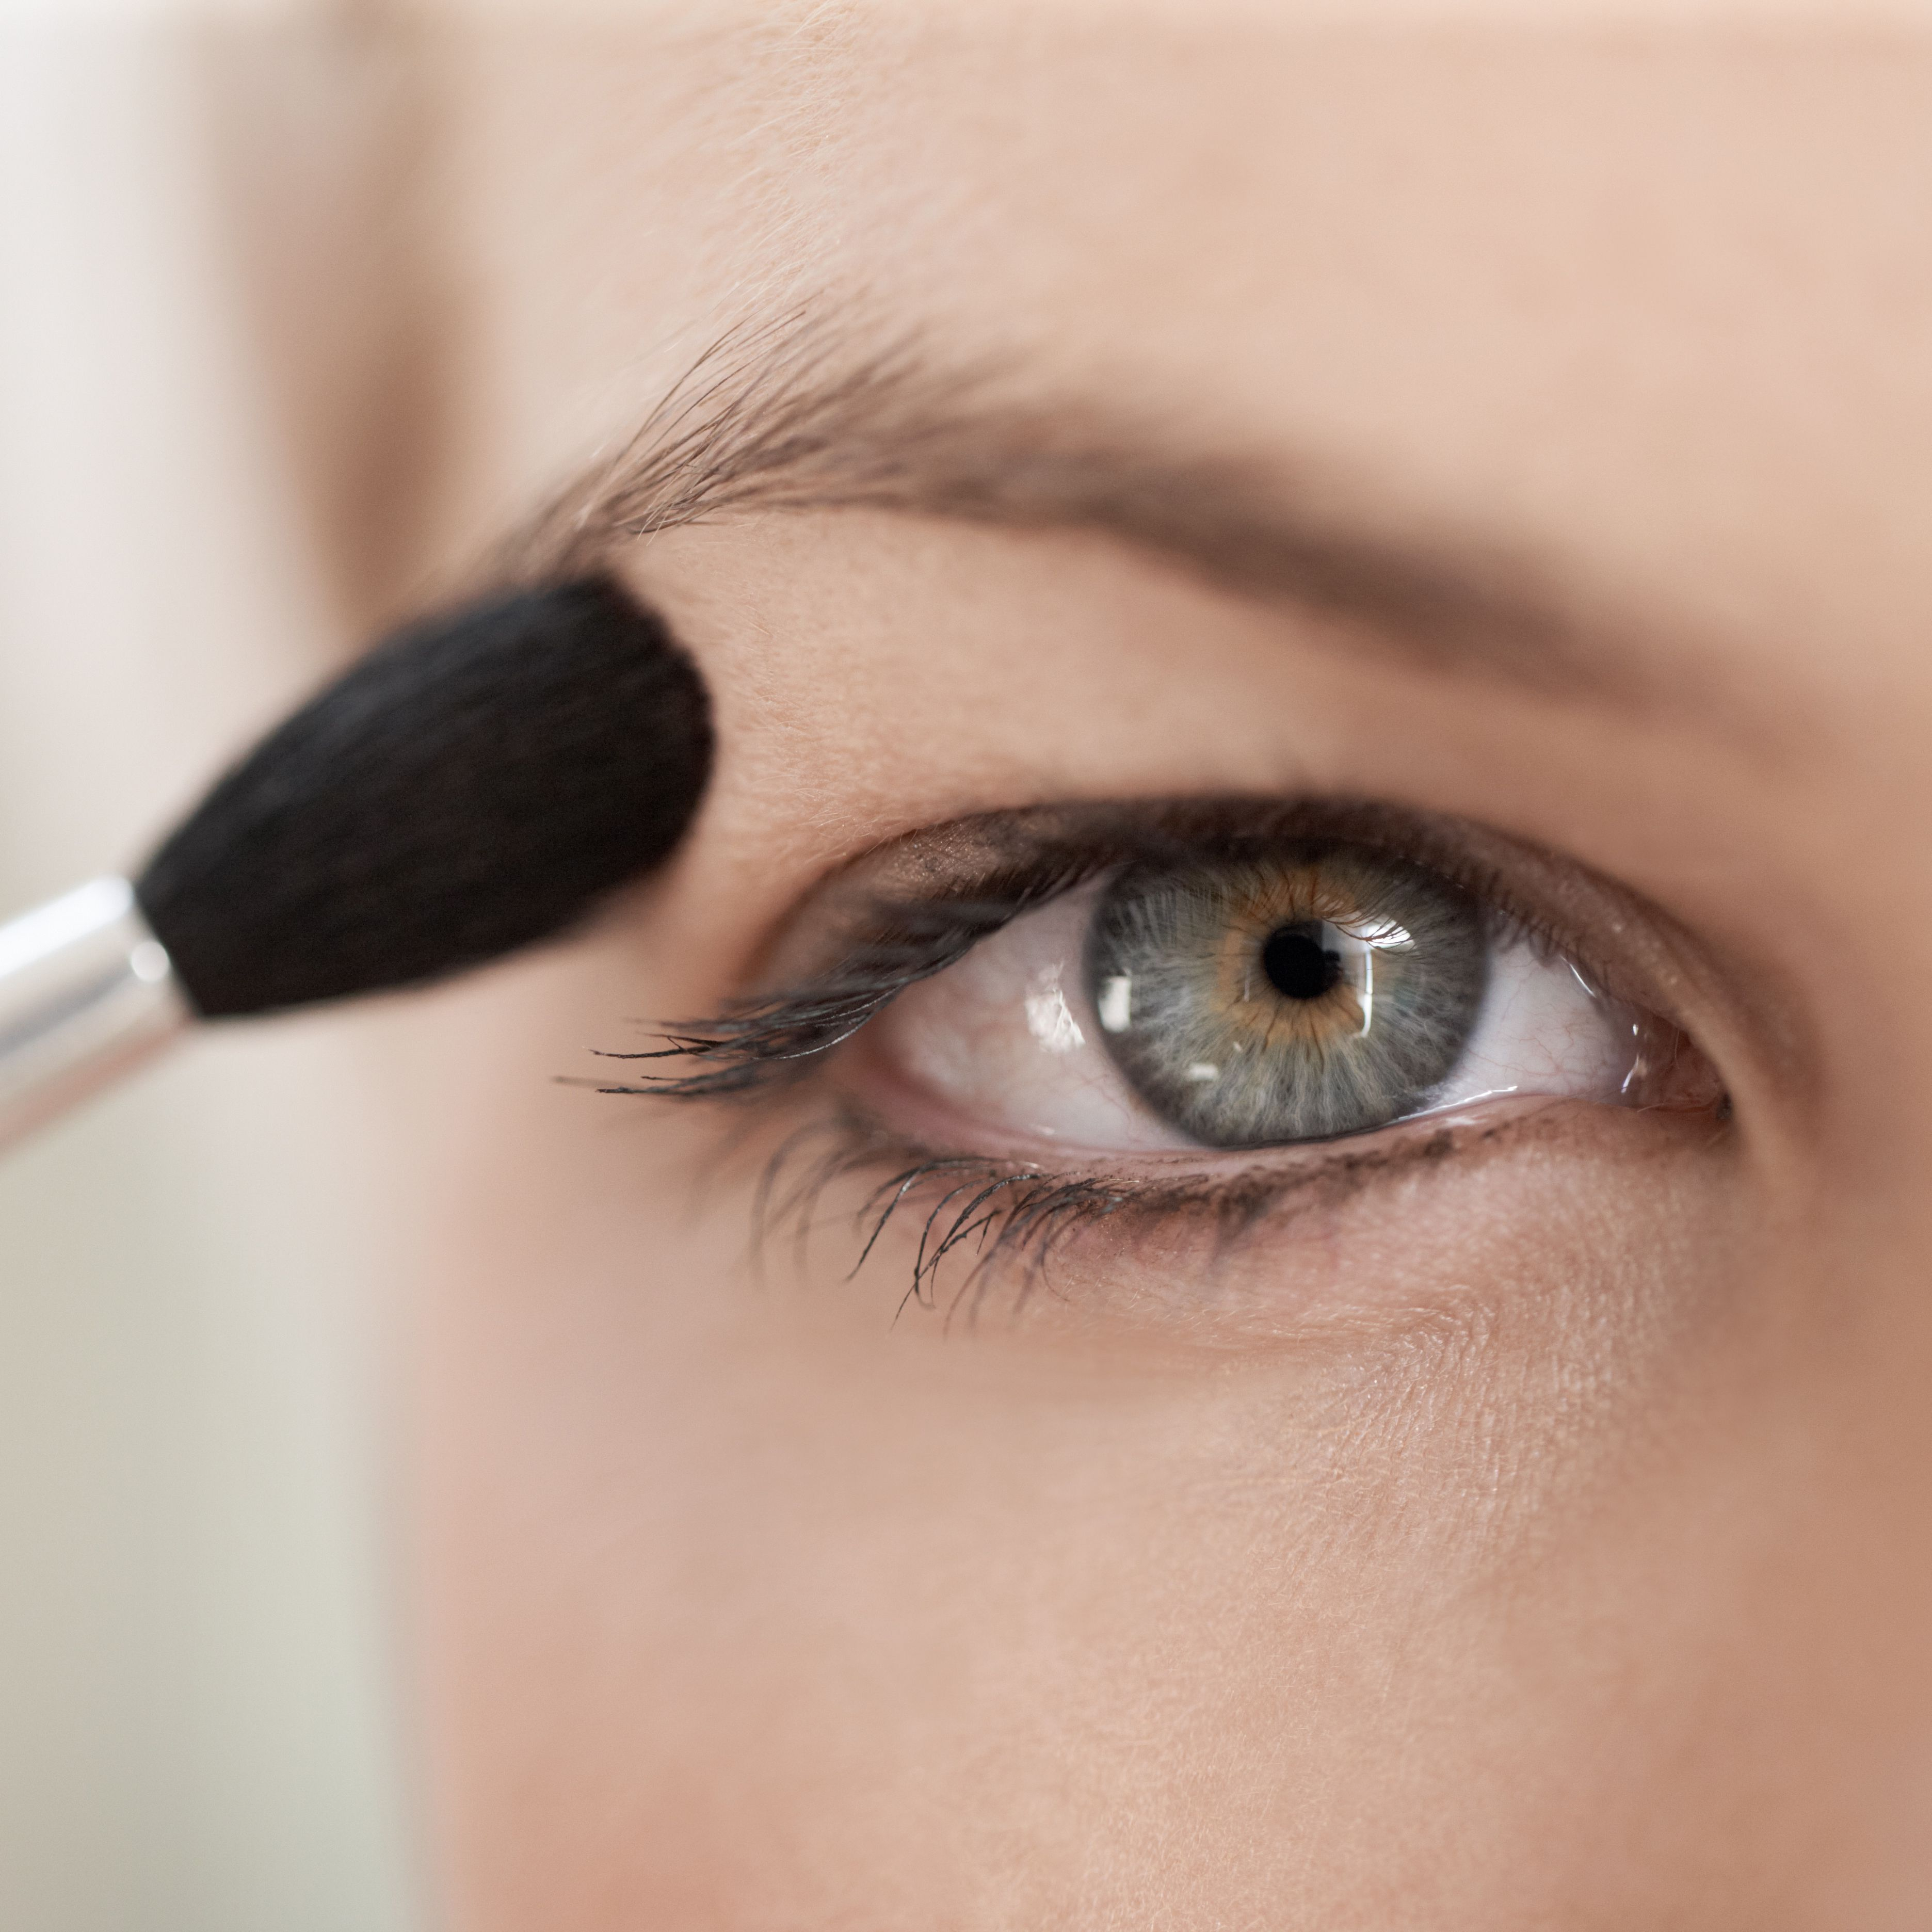 Eyes With Makeup Makeup Tricks For Hooded Eyes Hooded Eyes Makeup Tips And Tricks